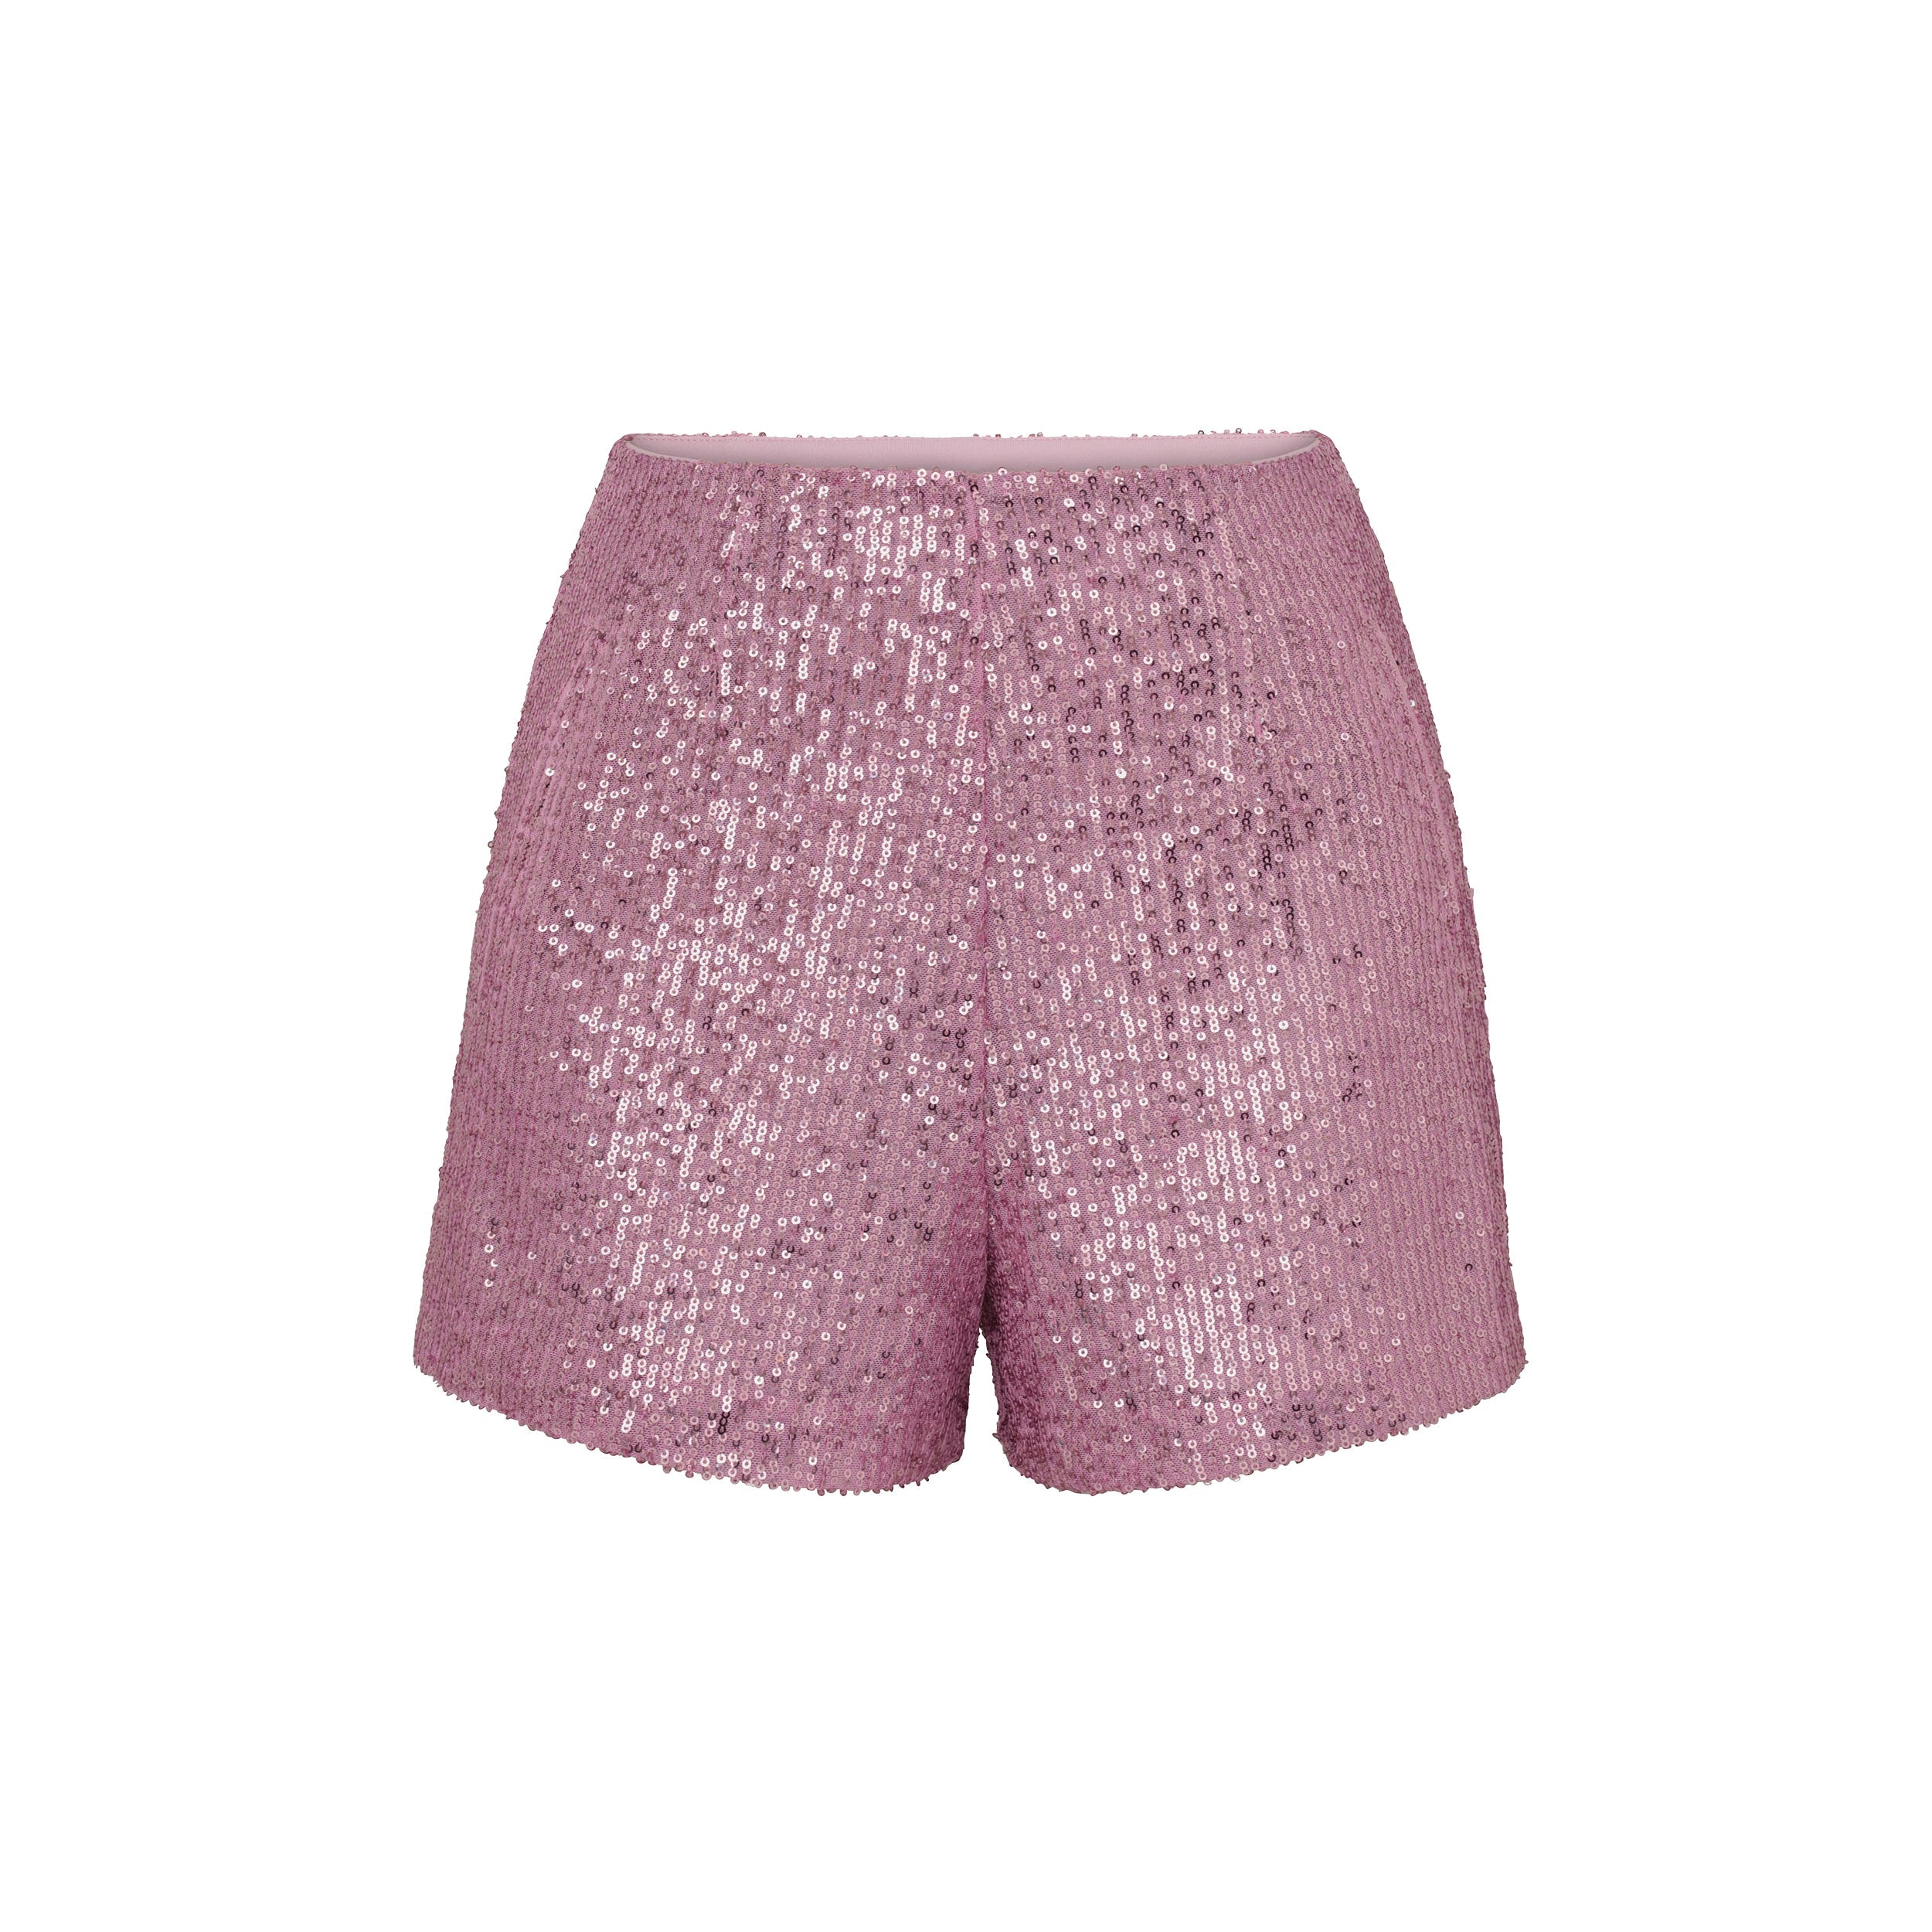 Product view of pink shorts with lustrous sequin embroidery